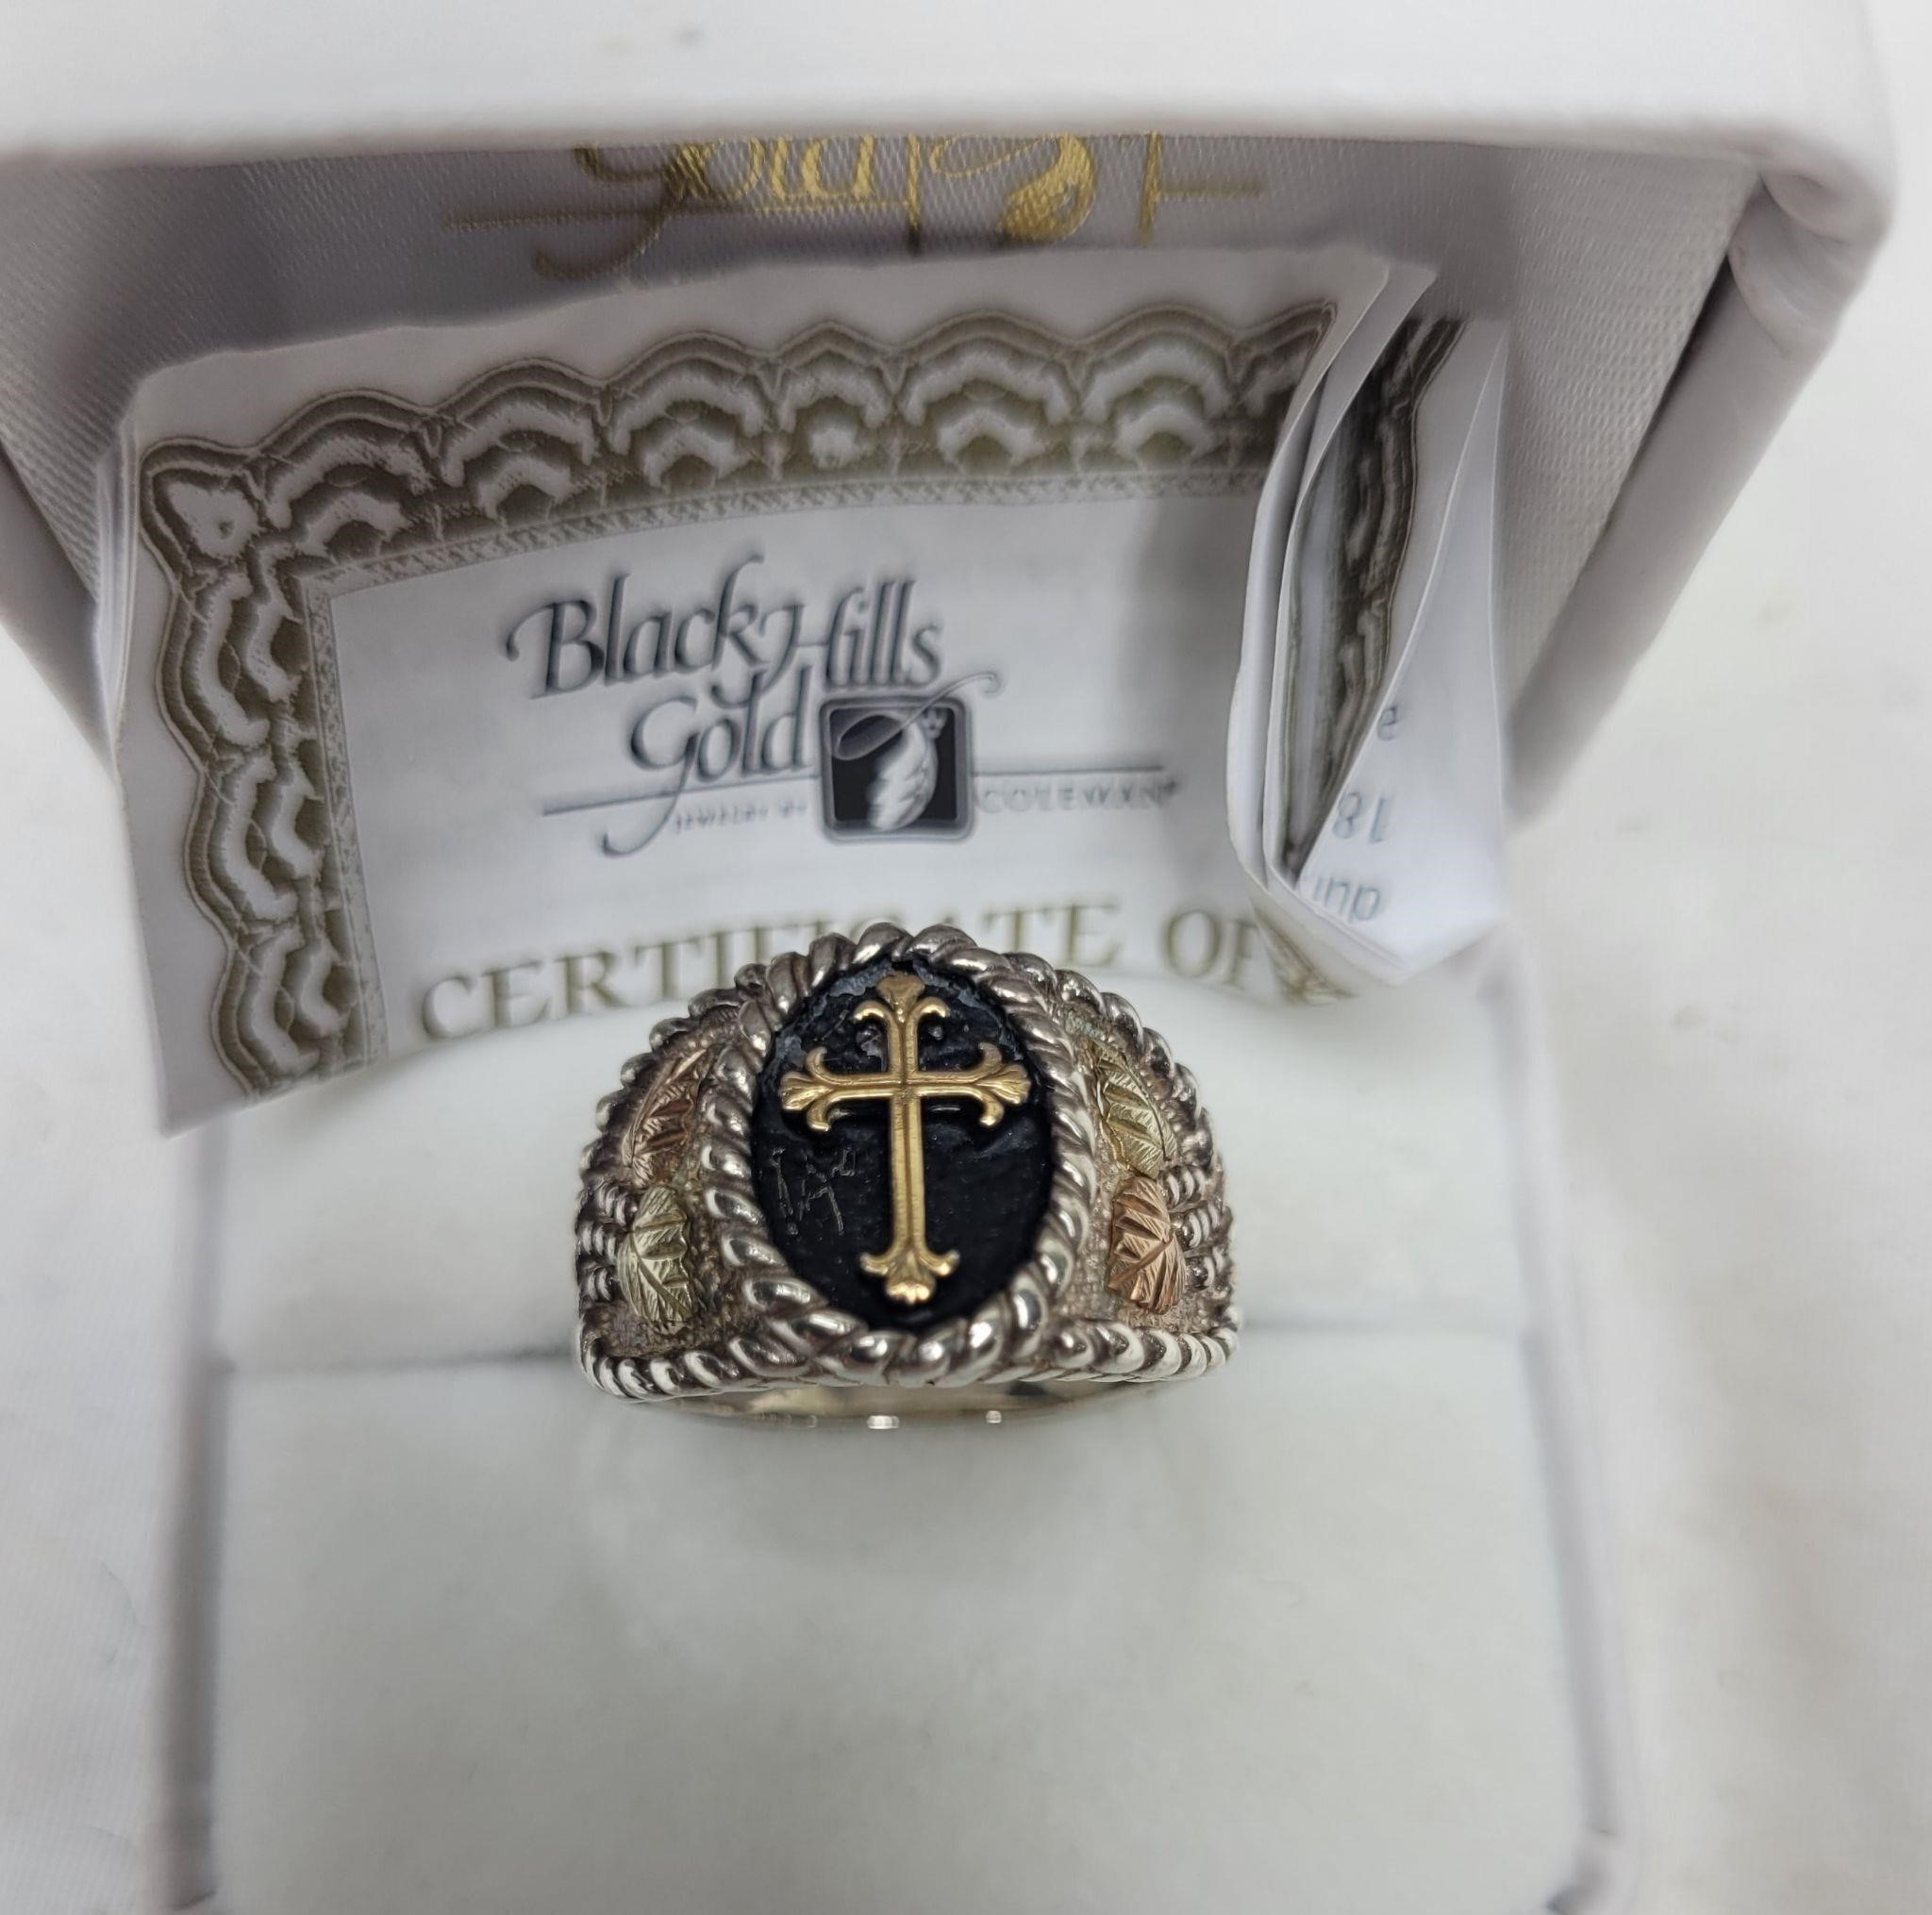 Black Hills Gold by Coleman sz 9 Ring